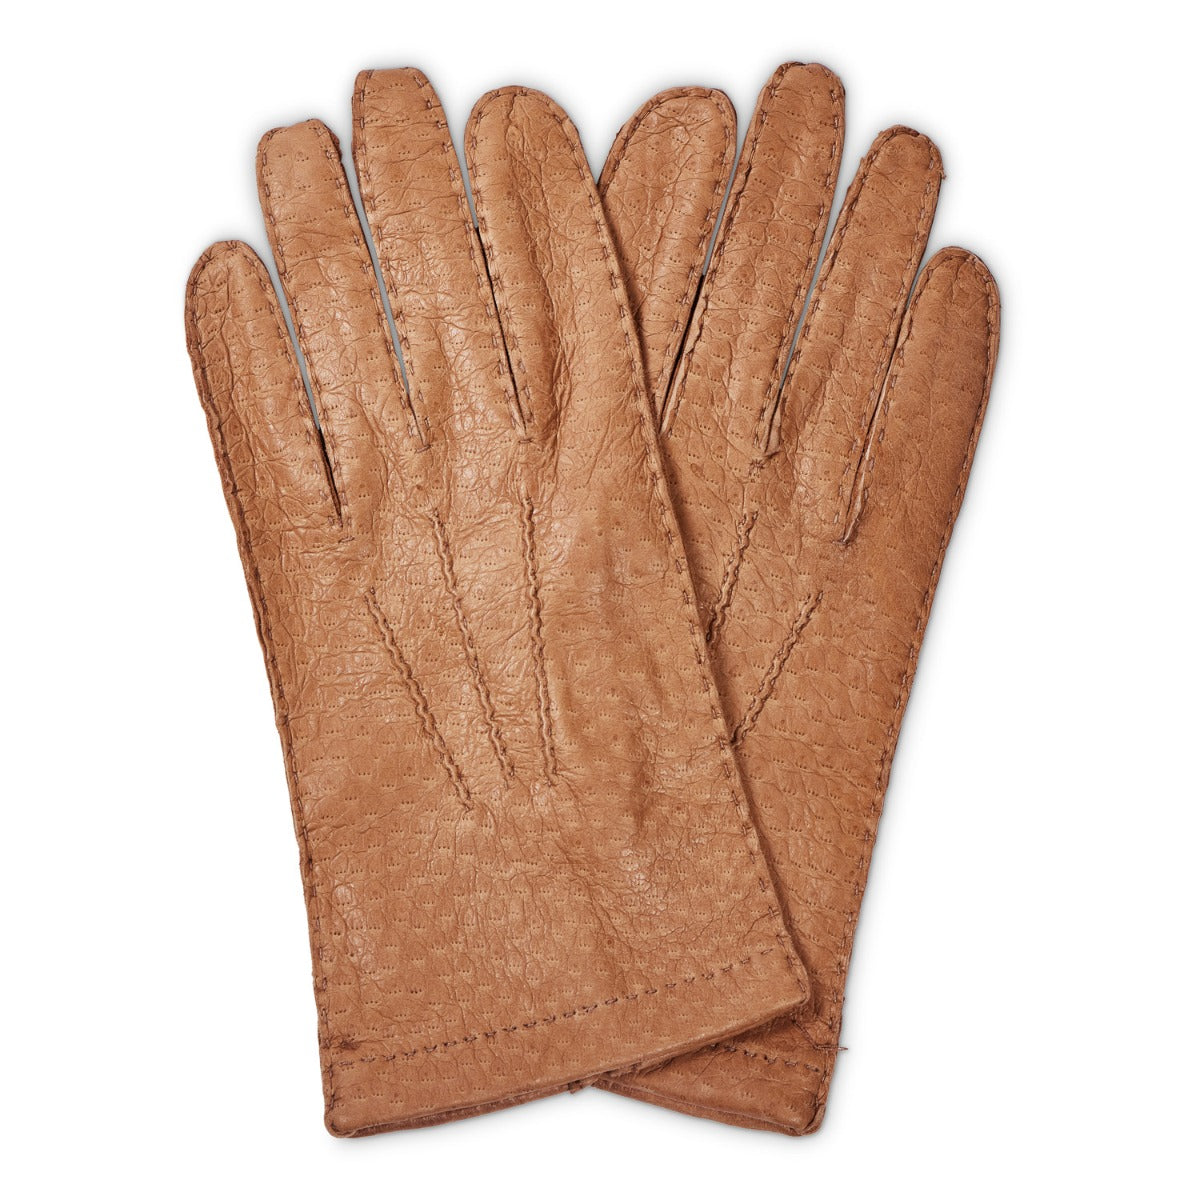 A pair of Sovereign Grade Light Brown Peccary Leather Gloves, Unlined by KirbyAllison.com on a white background.